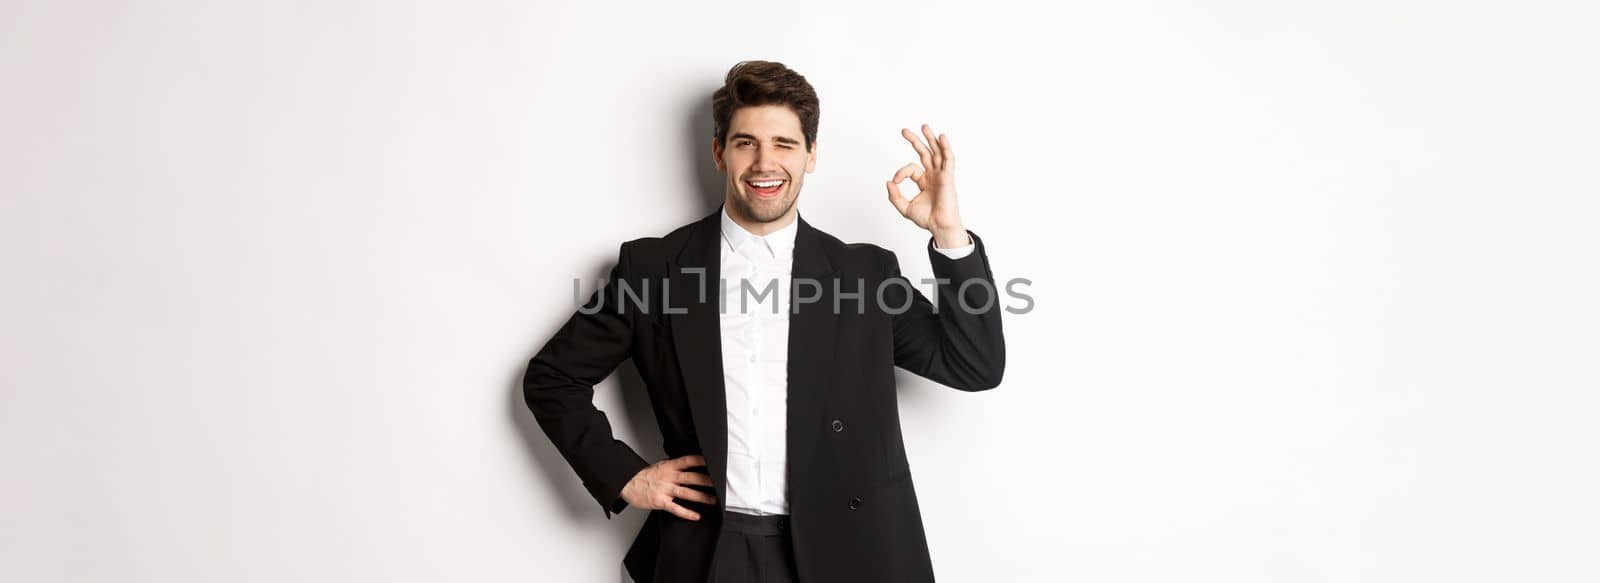 Concept of new year party, celebration and lifestyle. Portrait of confident, successful businessman in suit, showing okay sign and winking, approve something good, white background.